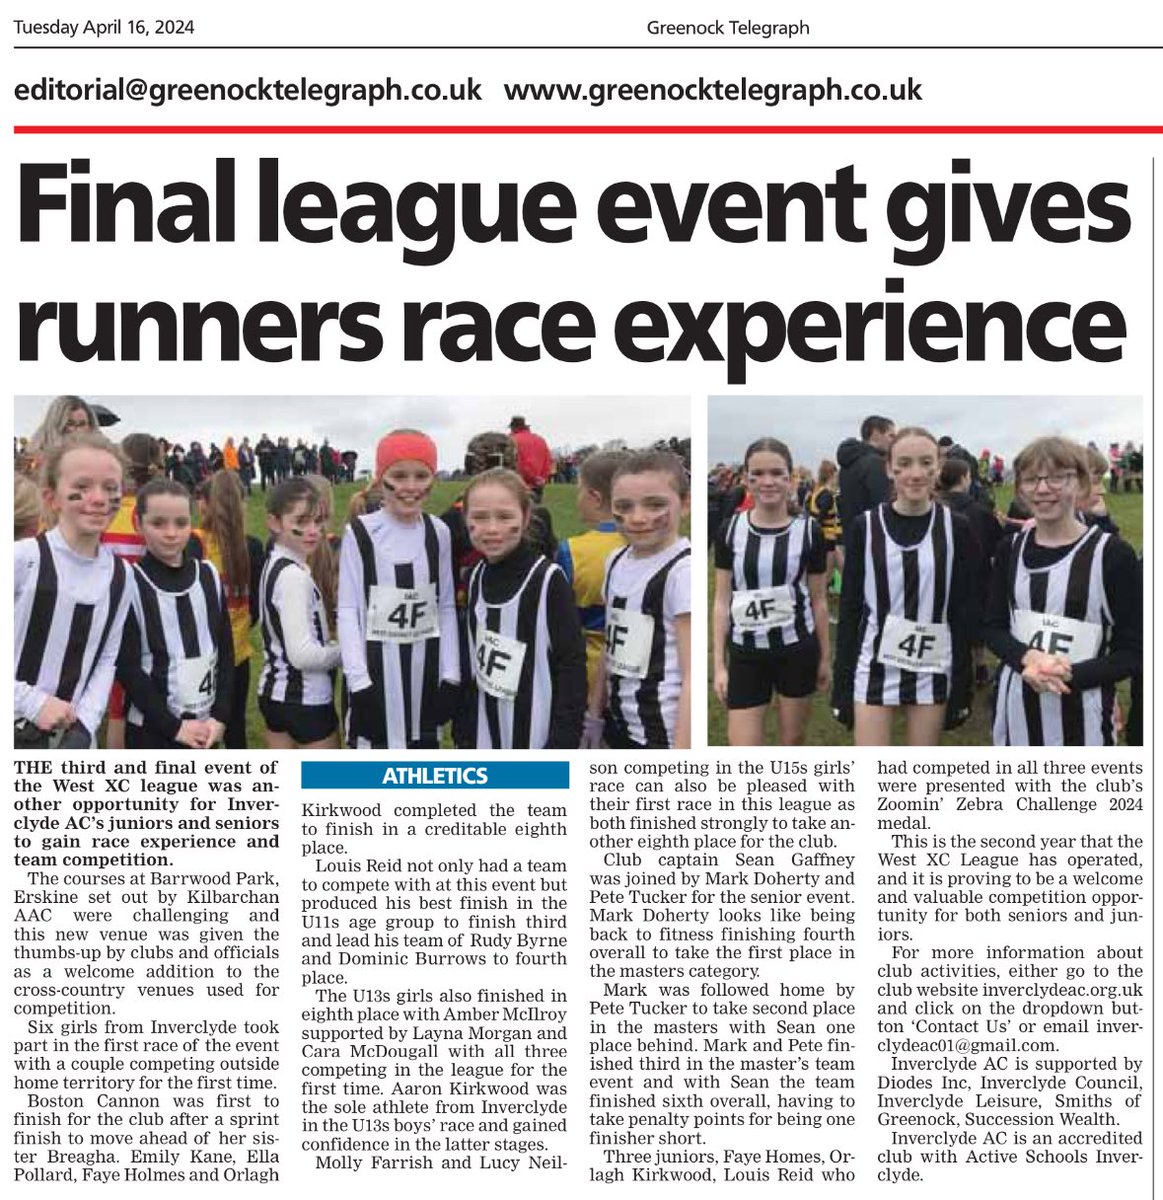 The final event of the West District XC league features in today’s @greenocktele 👏👏👏